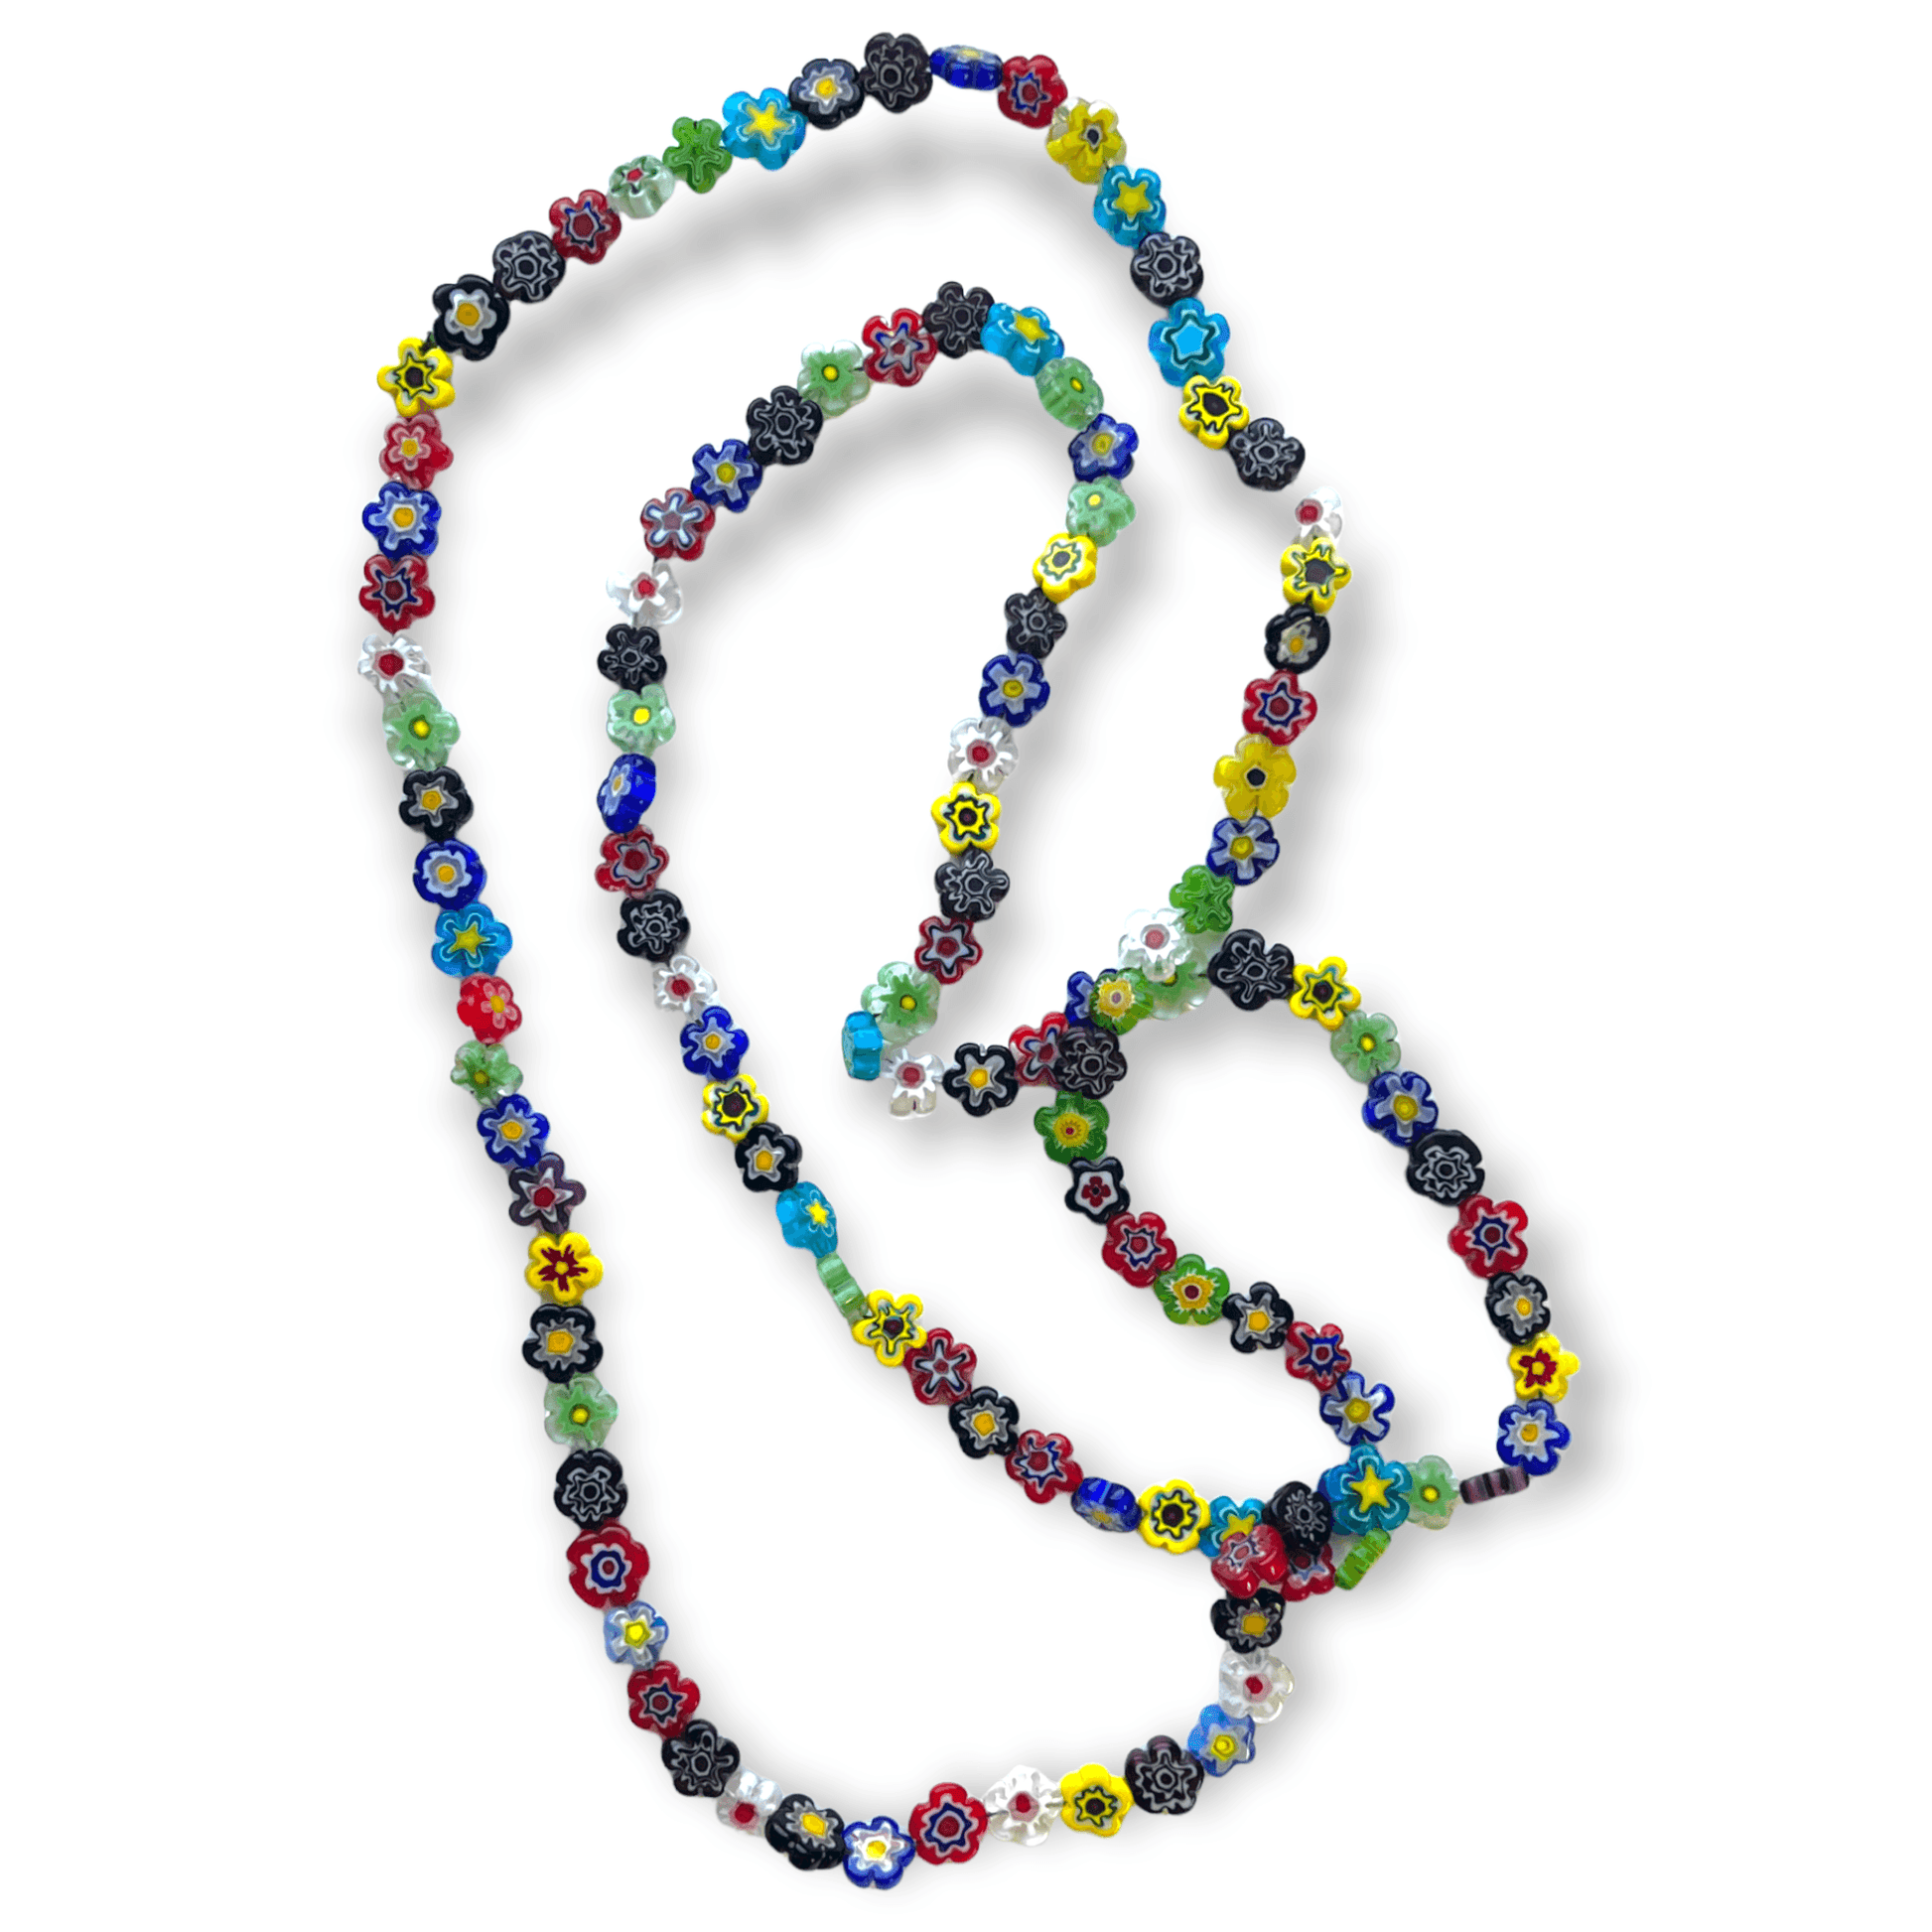 Multi-colored floral inspired glass bead necklaceSundara Joon